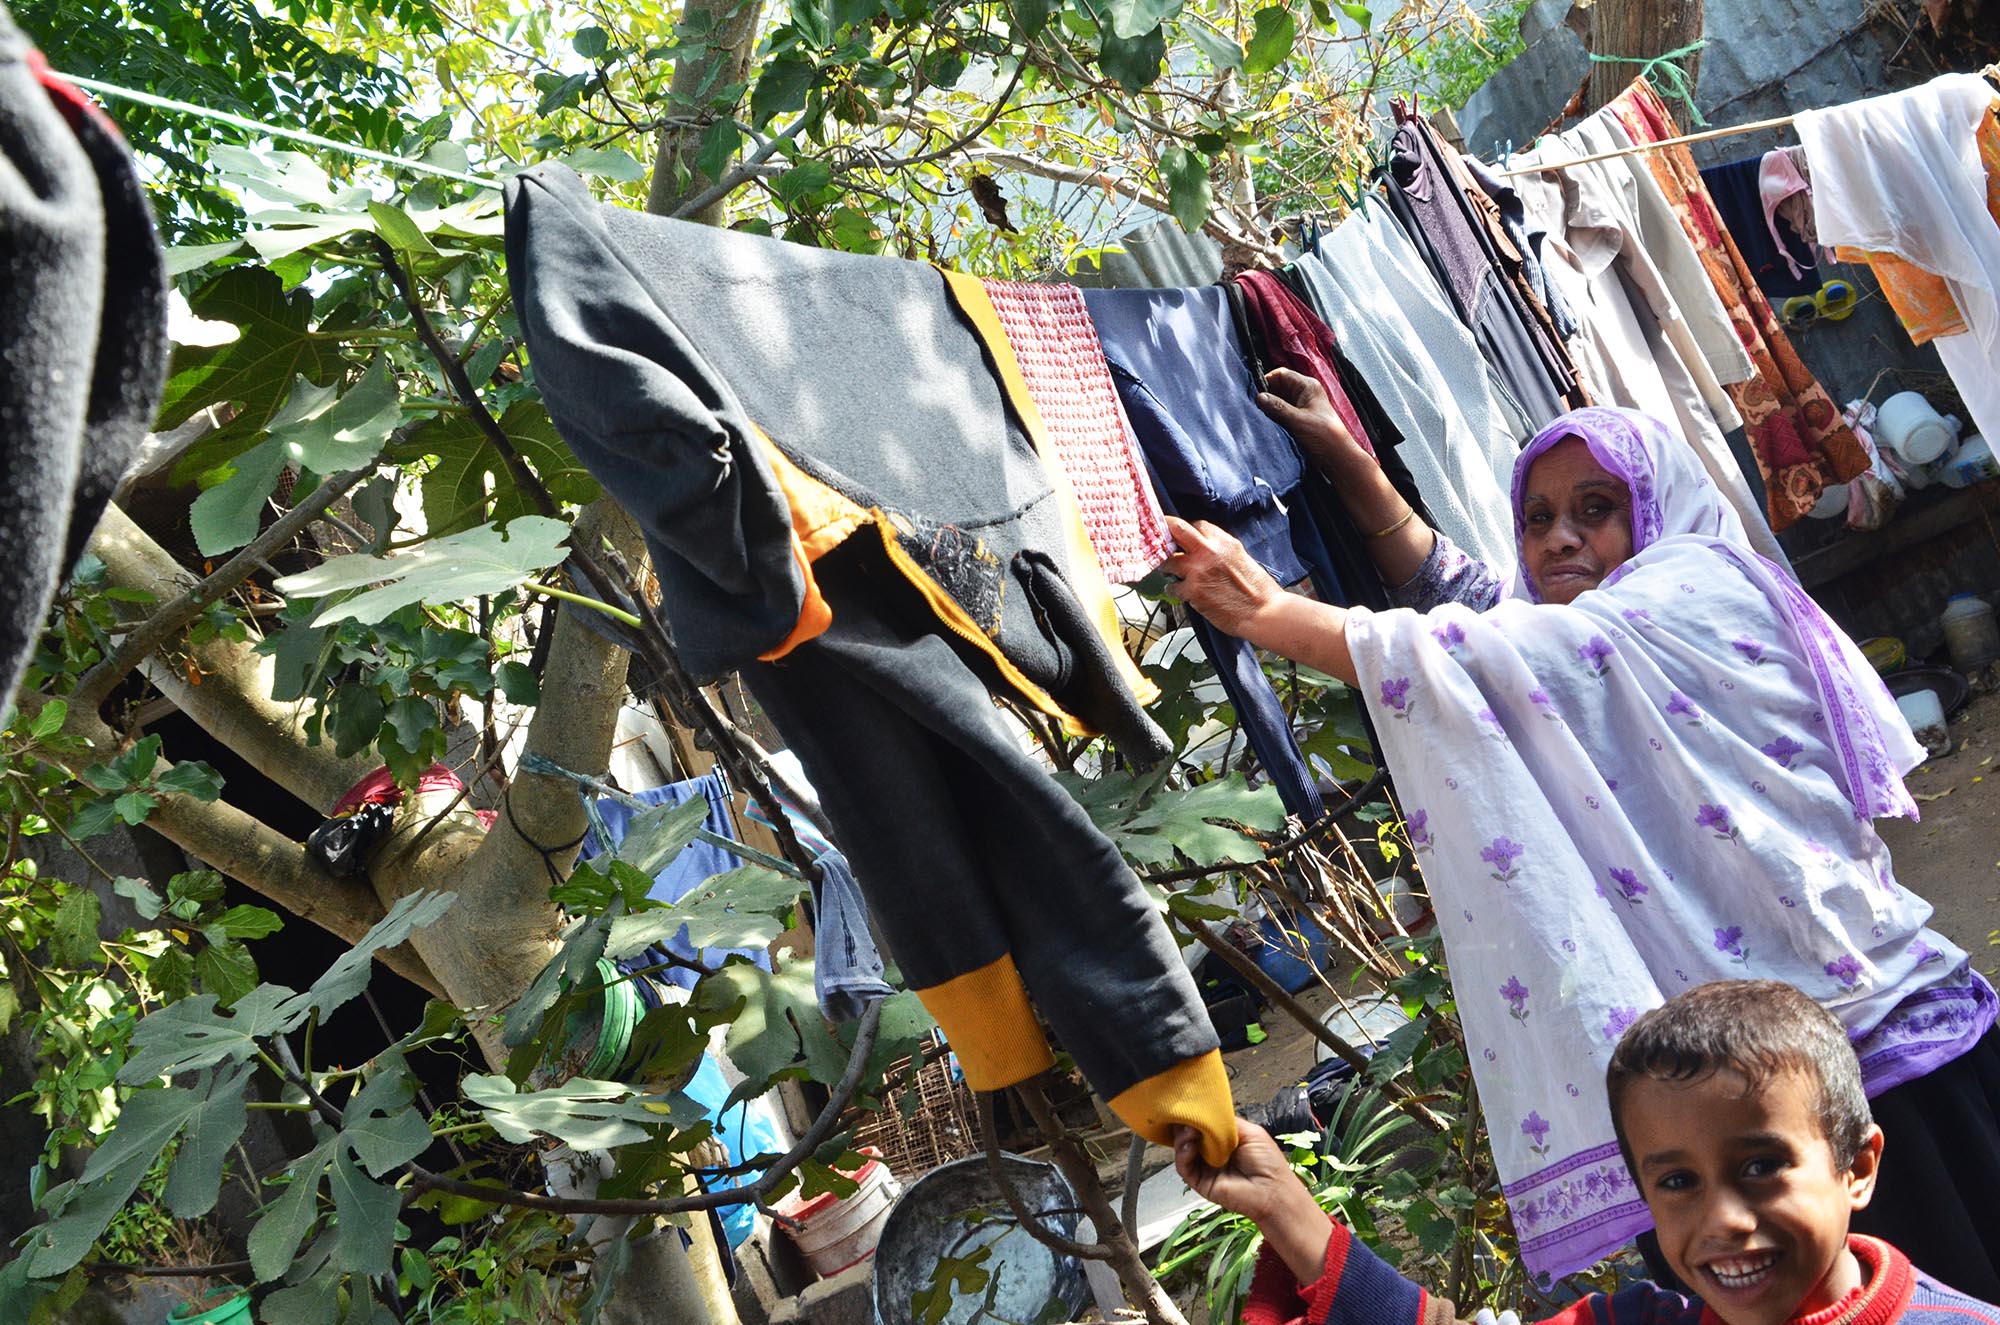 Amir and his mother hanging laundry.